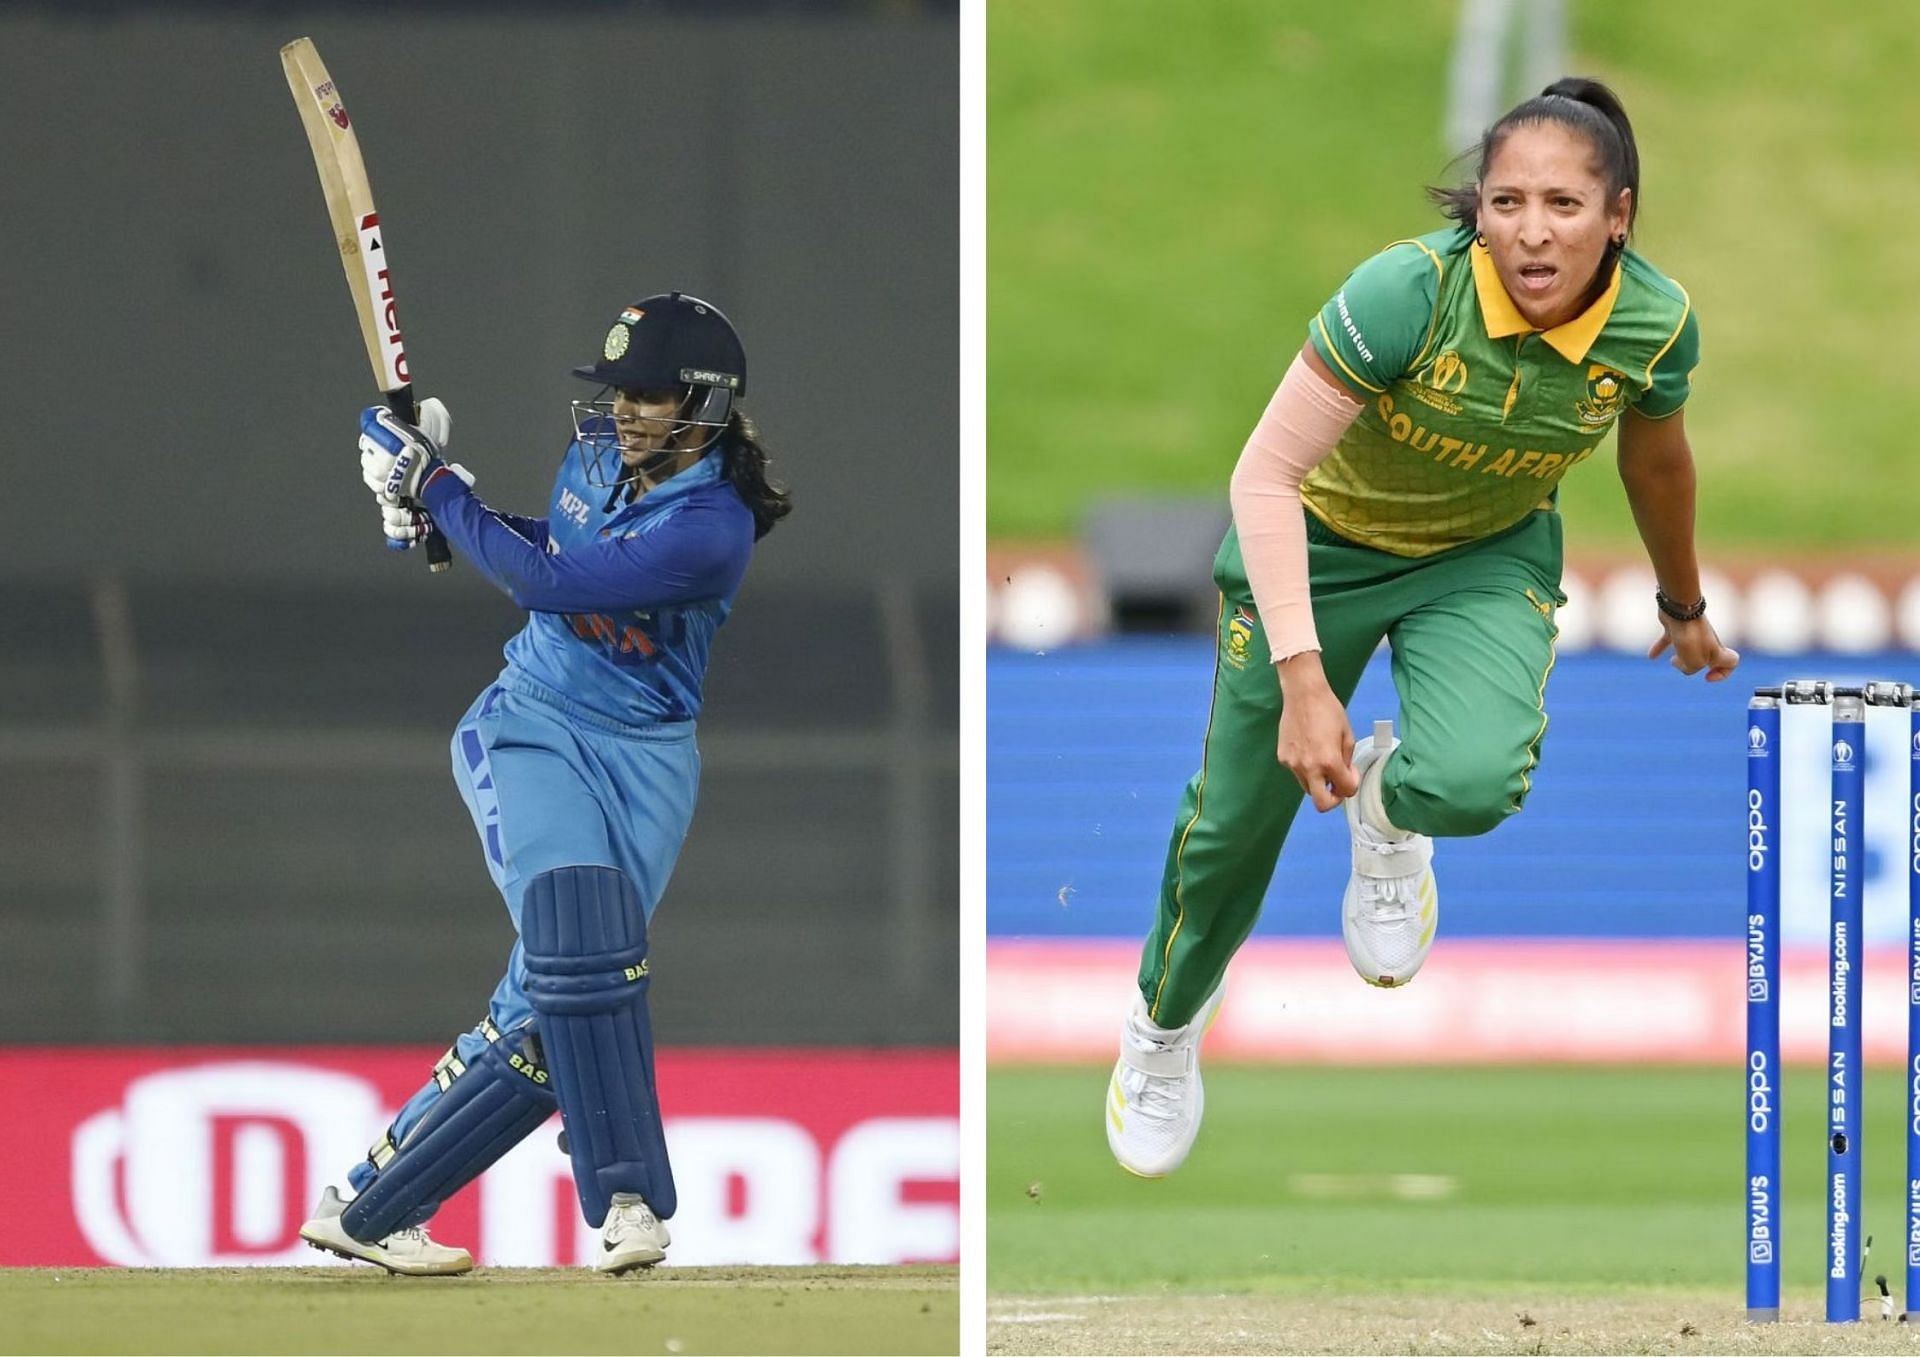 Smriti Mandhana and Shabnim Ismail will be in action as India and South Africa open the tri-series in East London.